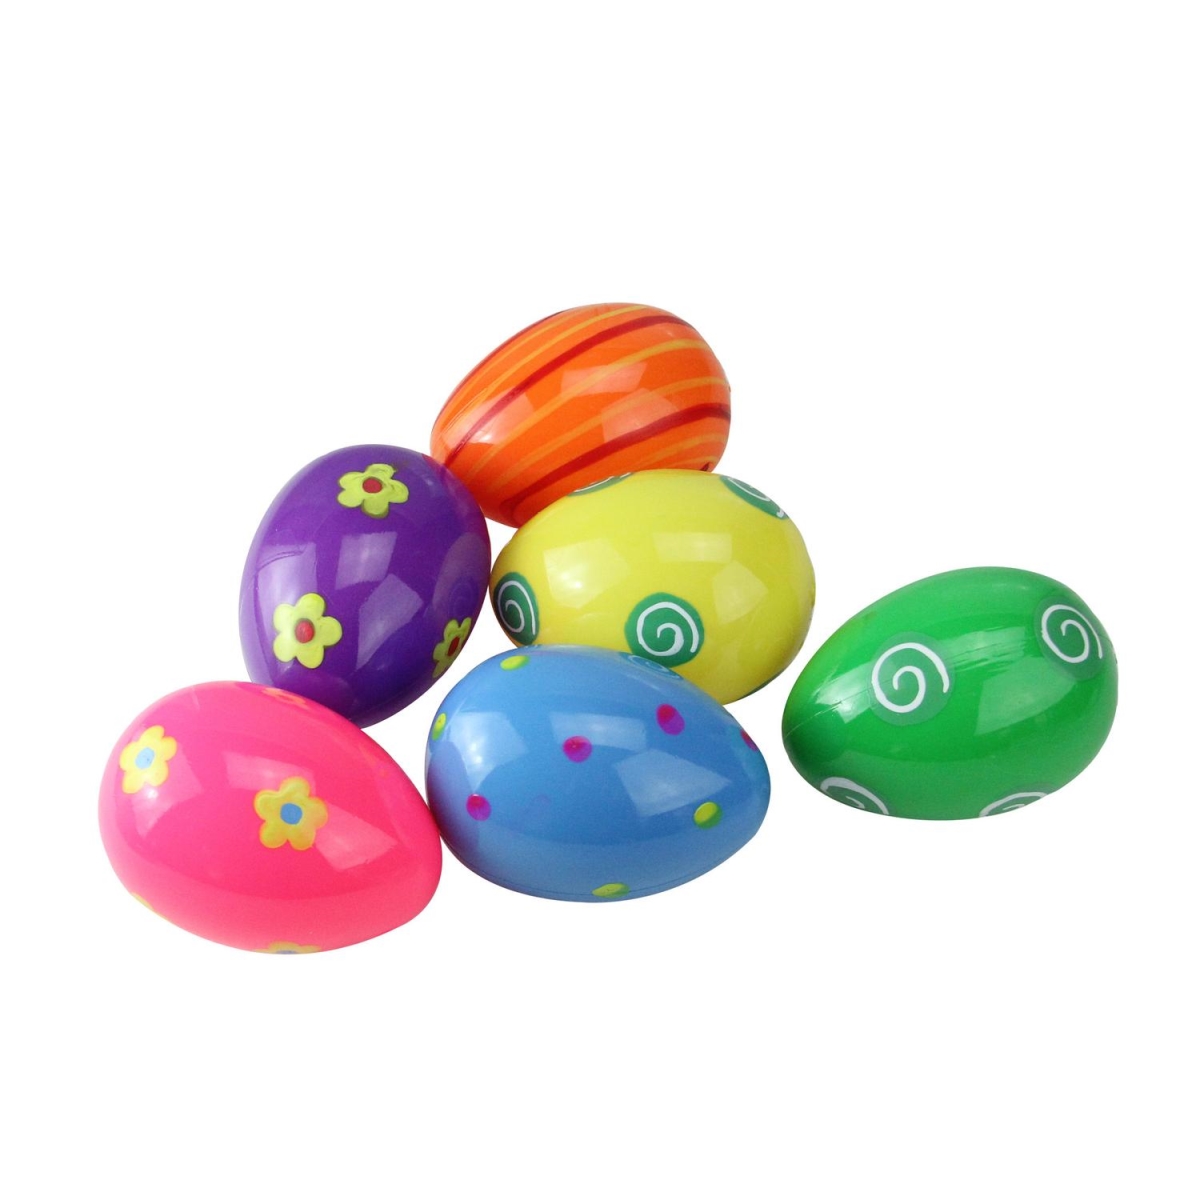 Picture of Northlight 32733321 3.25 in. Assorted Multicolored Springtime Easter Eggs with Bright Painted Designs - Pack of 6